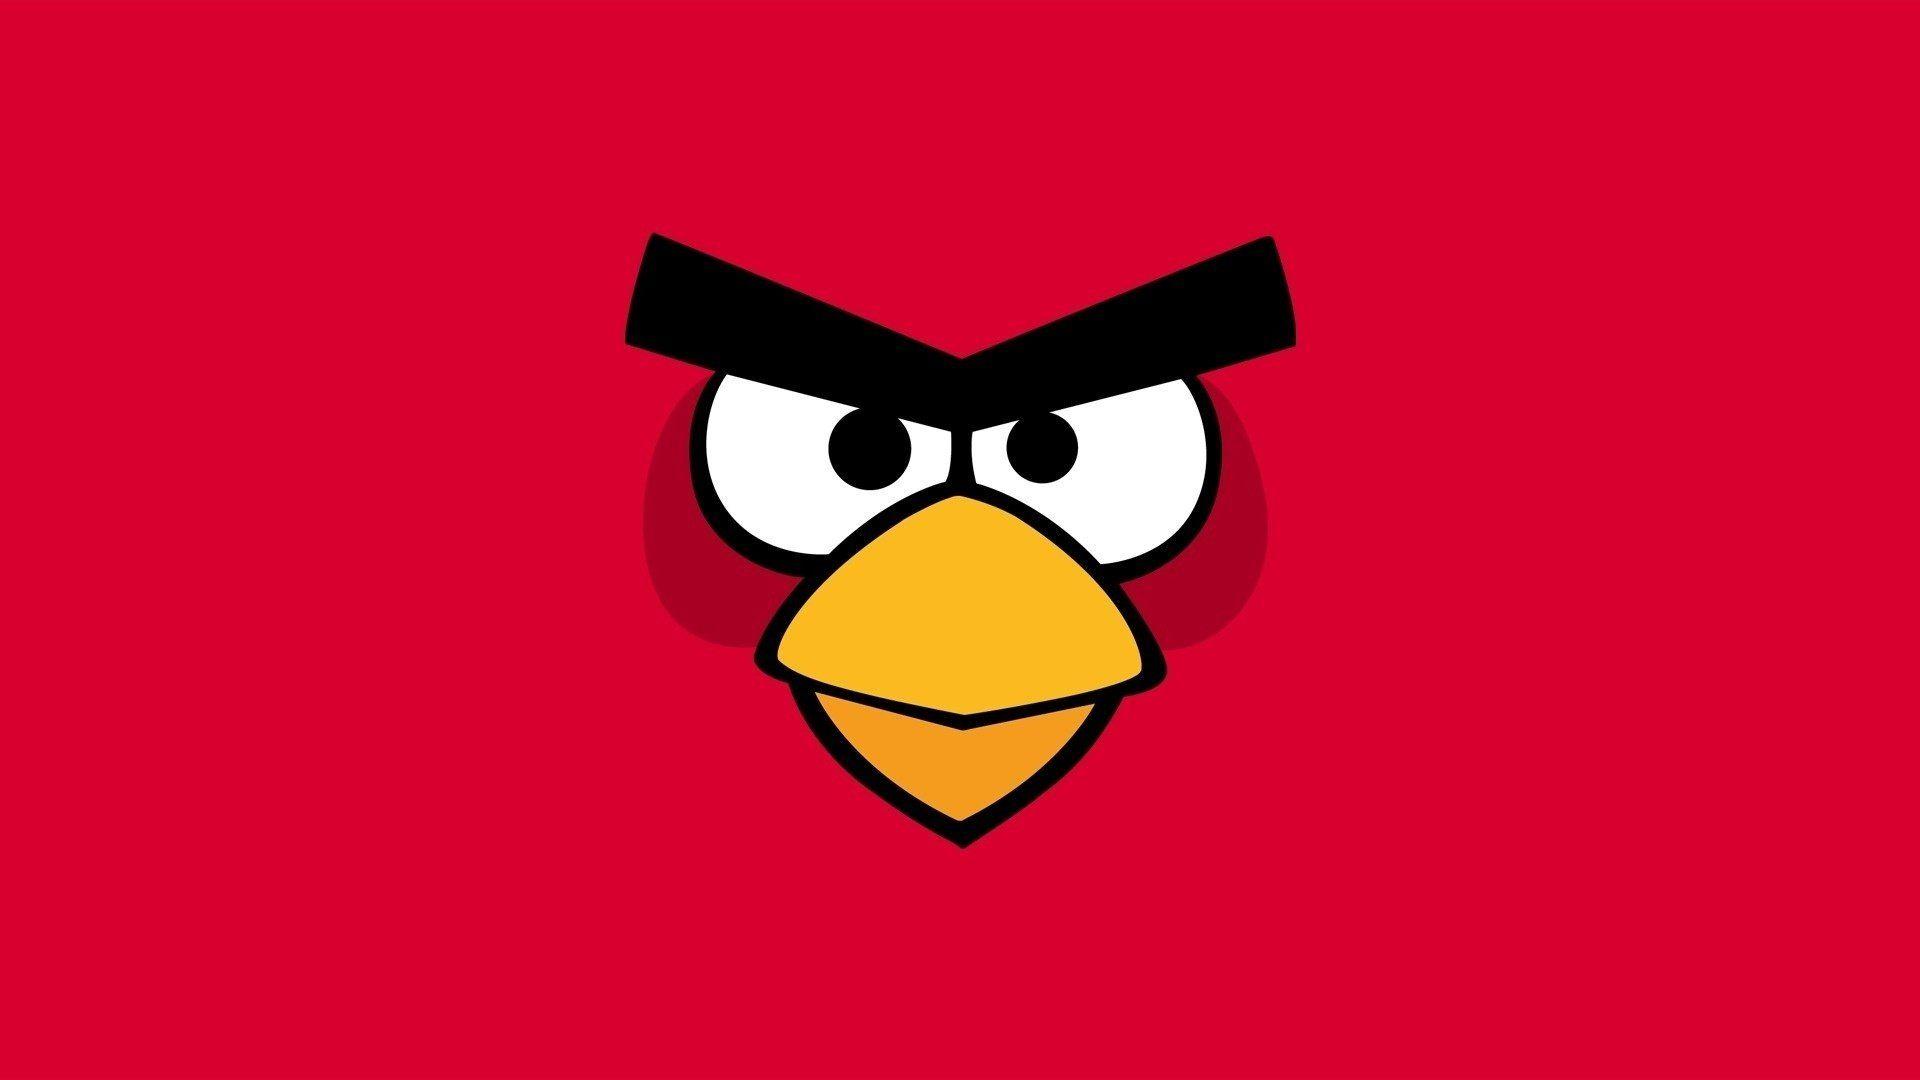 Angry Birds Wallpapers - Wallpaper Cave